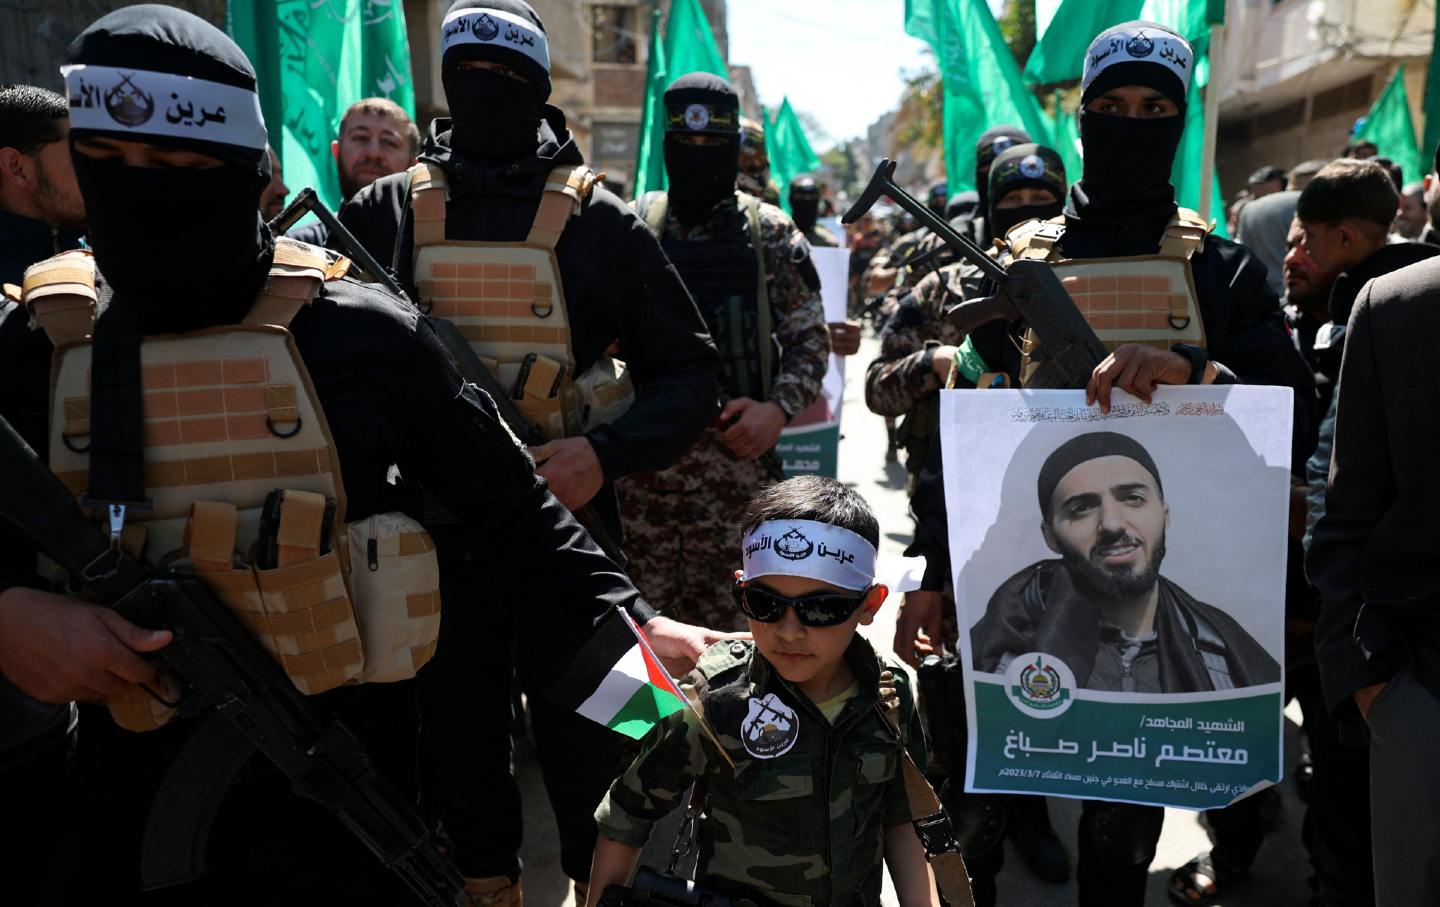 Young boy with Hamas militants